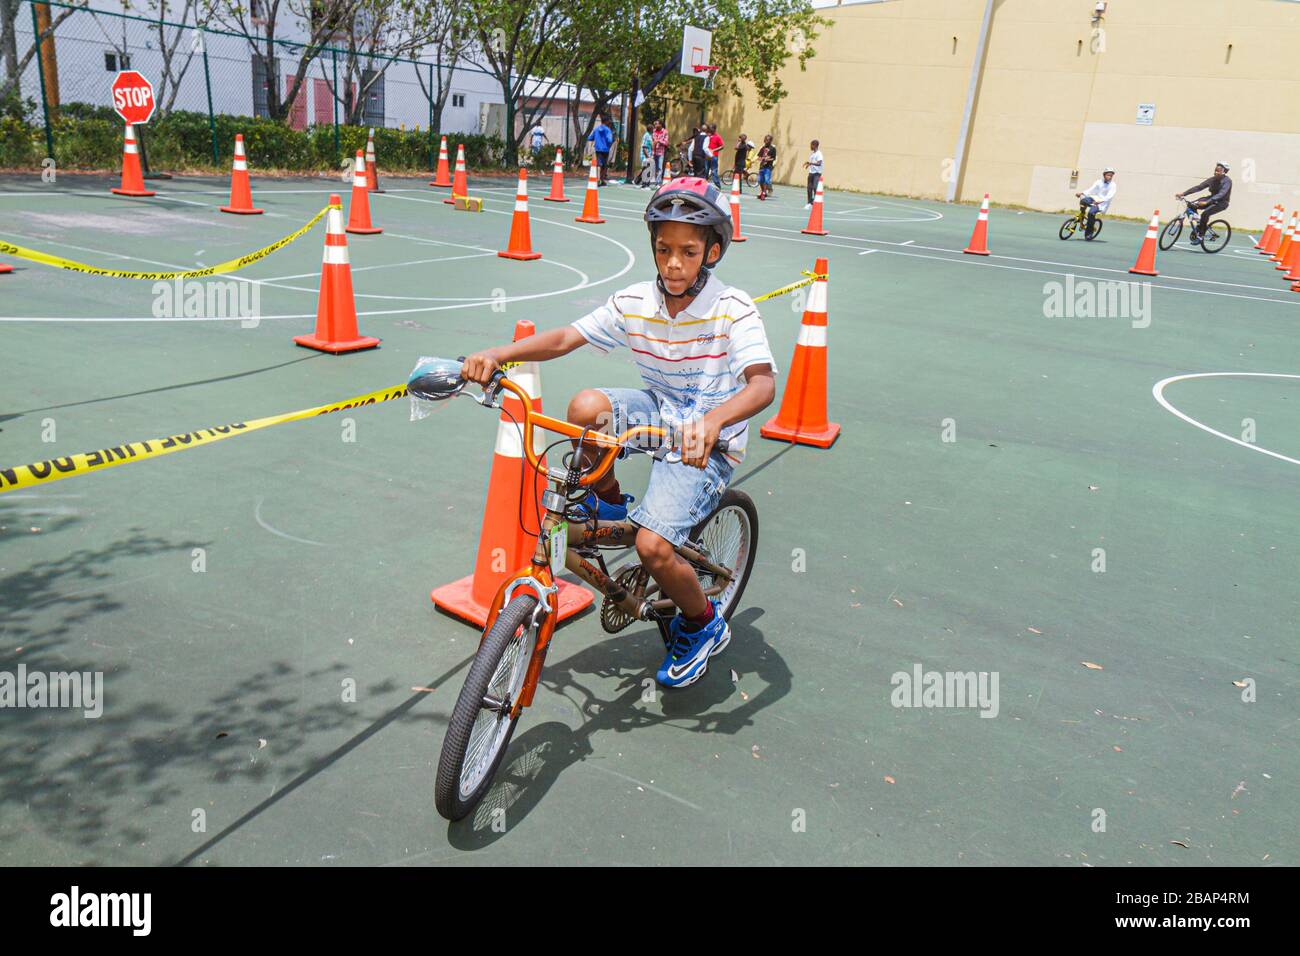 North Miami Beach Florida,Police Community Unit Bicycle Rodeo,riding obstacle course,orange traffic cones,Black boy boys,male kid kids child children Stock Photo